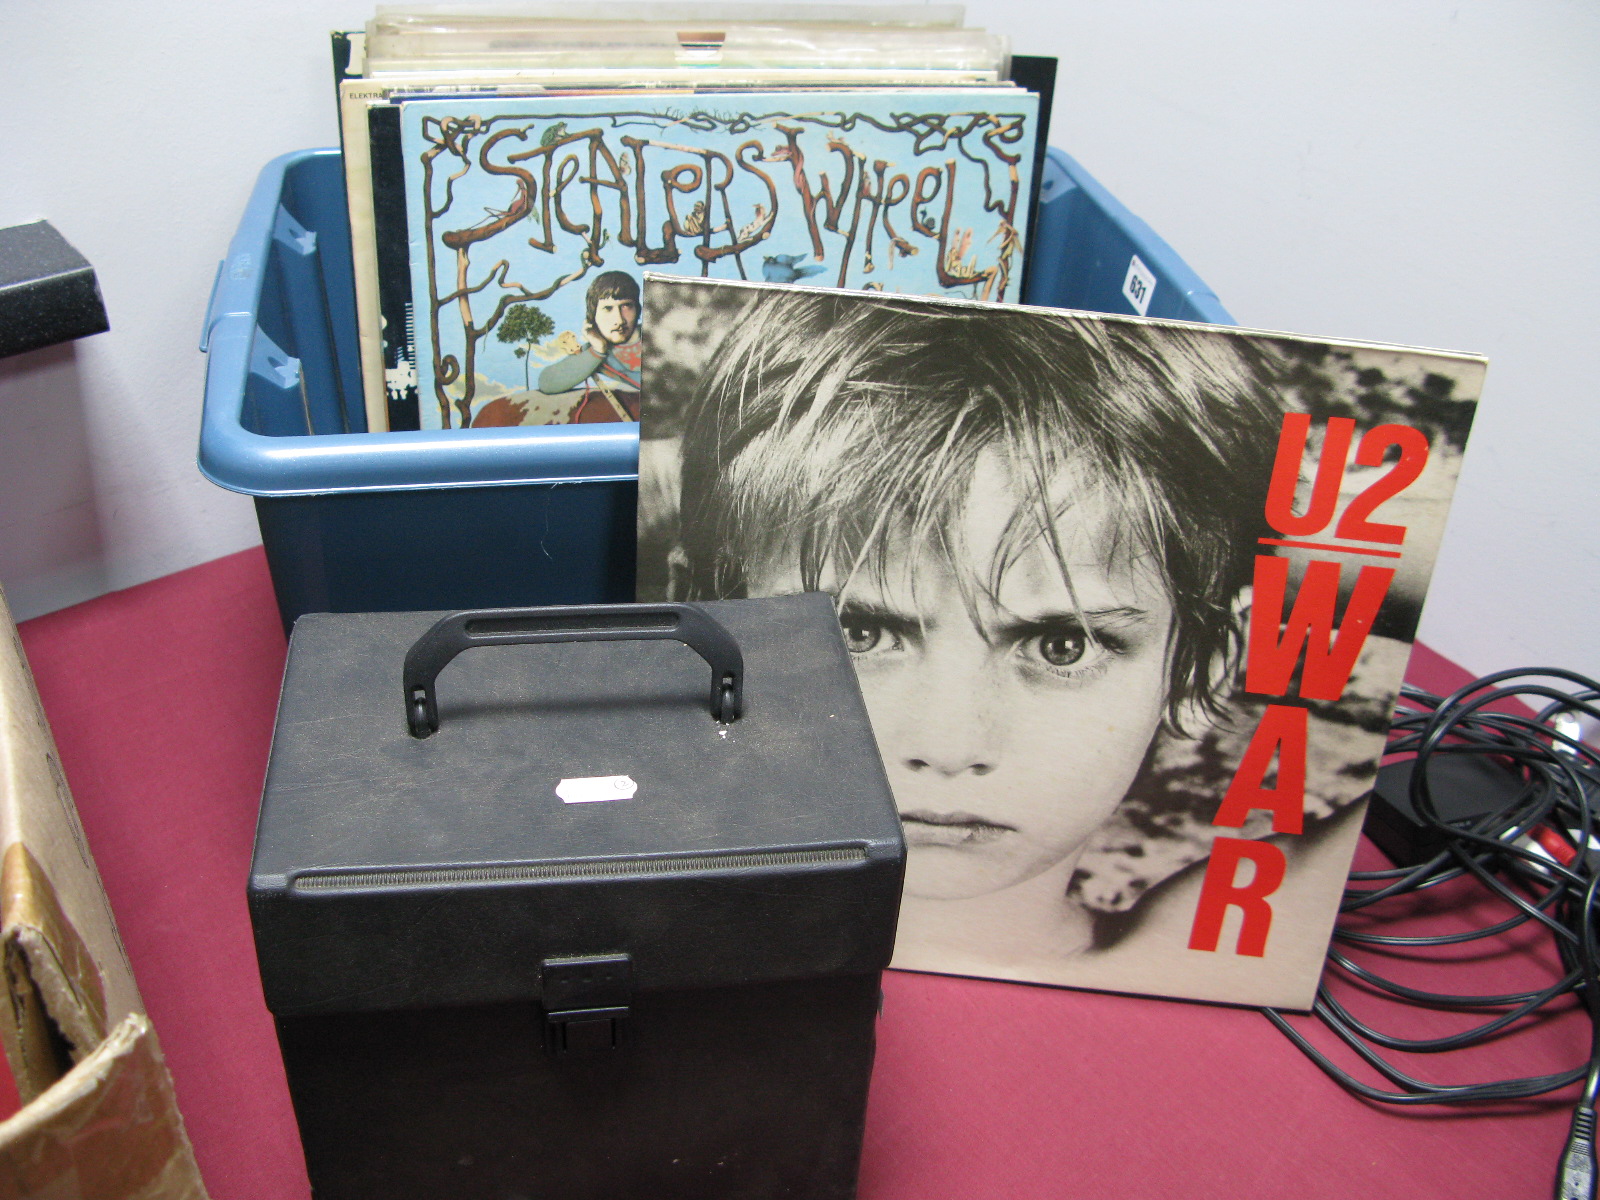 A Mixed Collection of LP's and 45 rpm - to include U2, Styx, Roxy Music, Cars, The Kinks, 10cc,